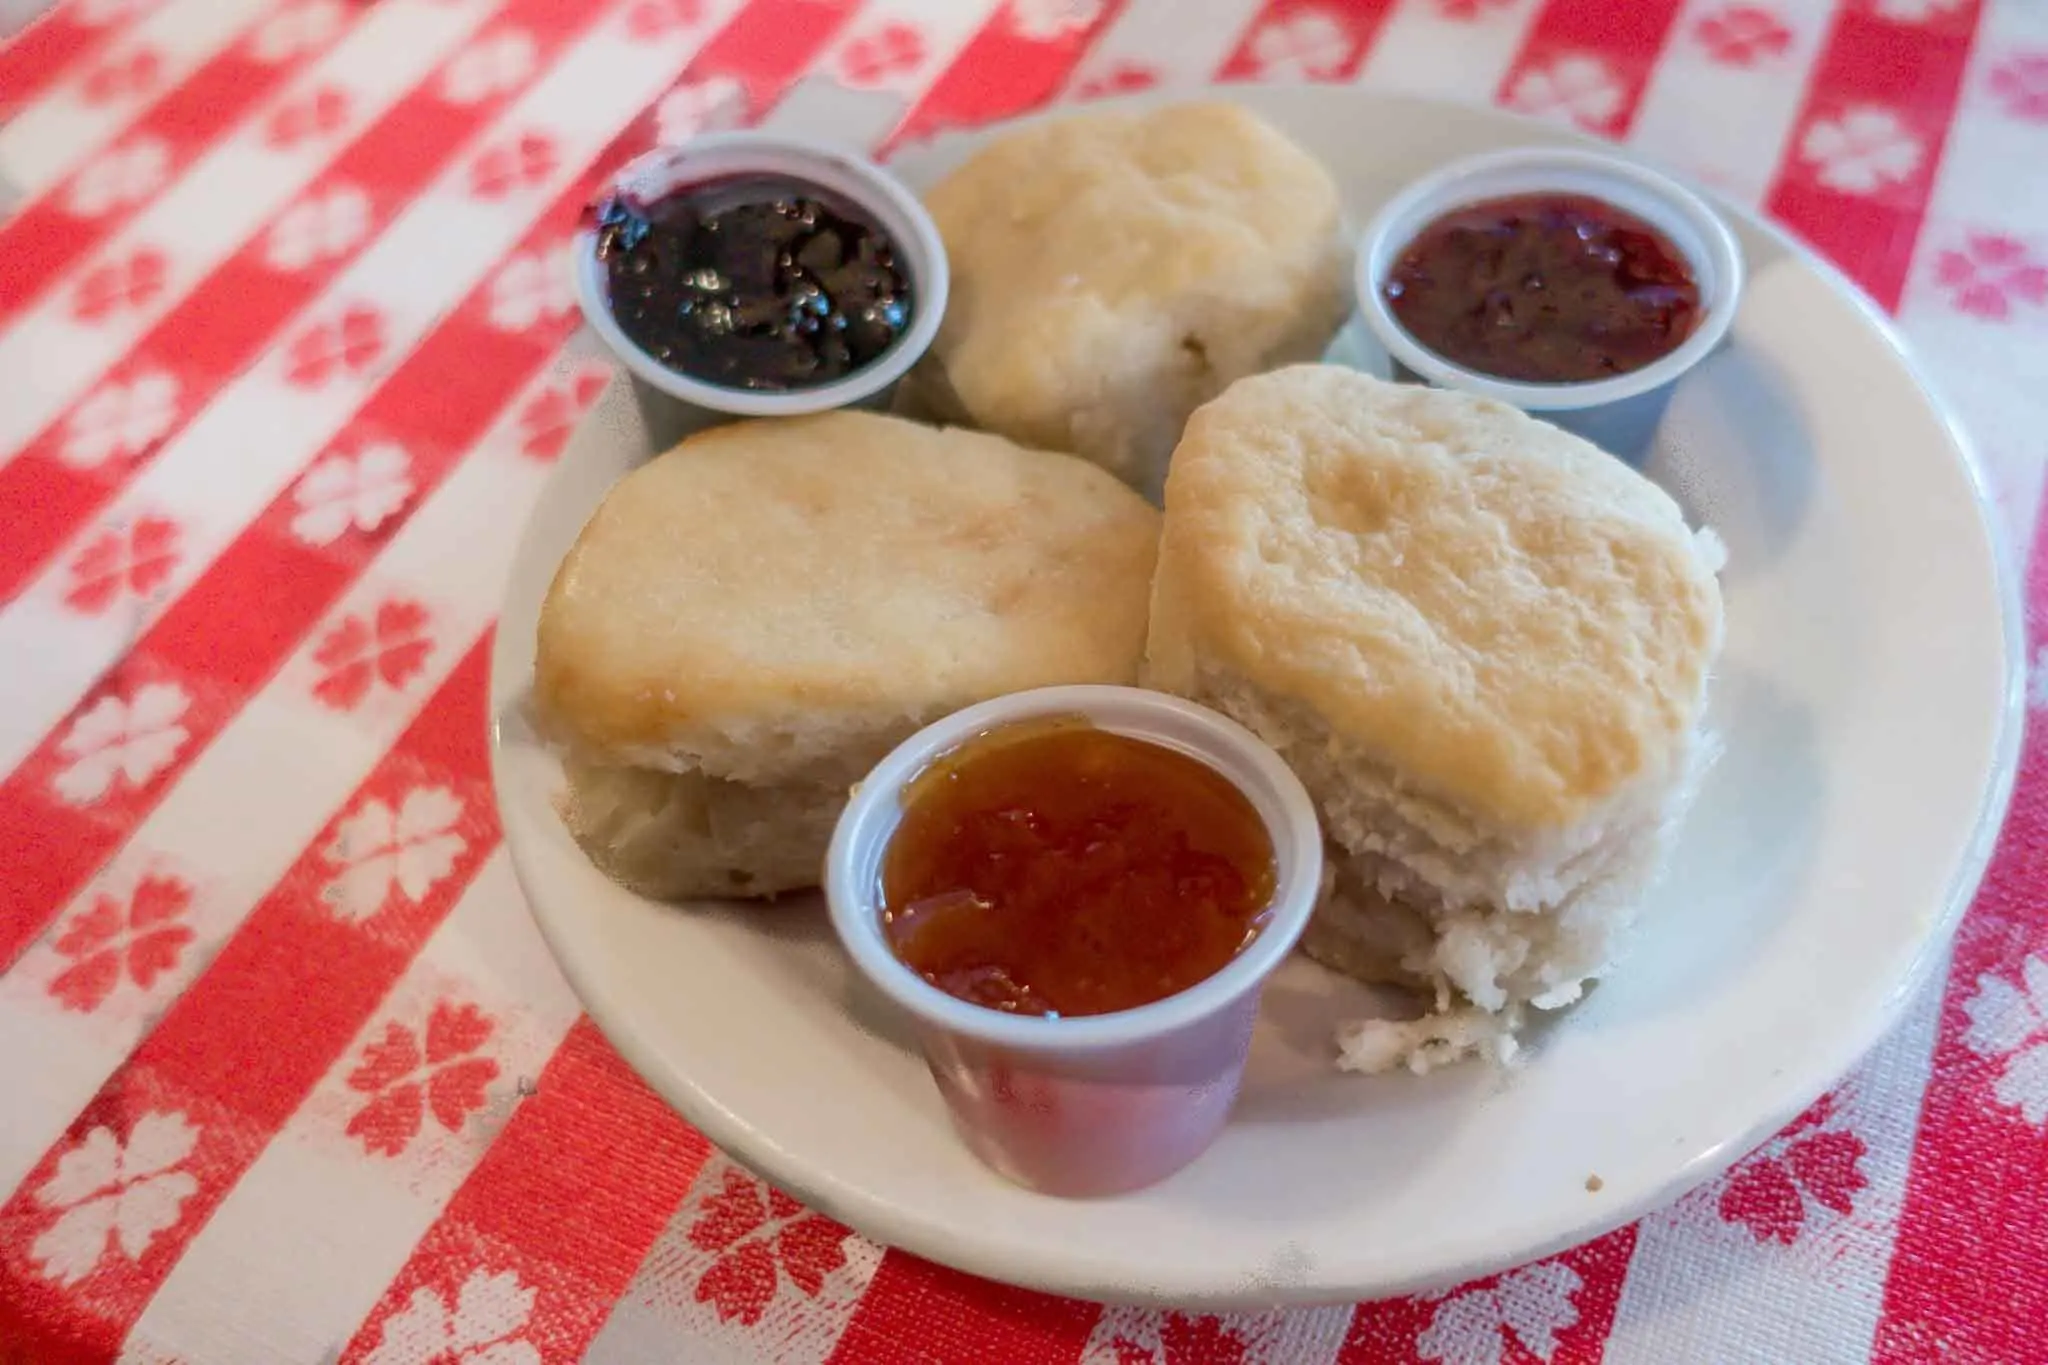 Biscuits and jam on a plate